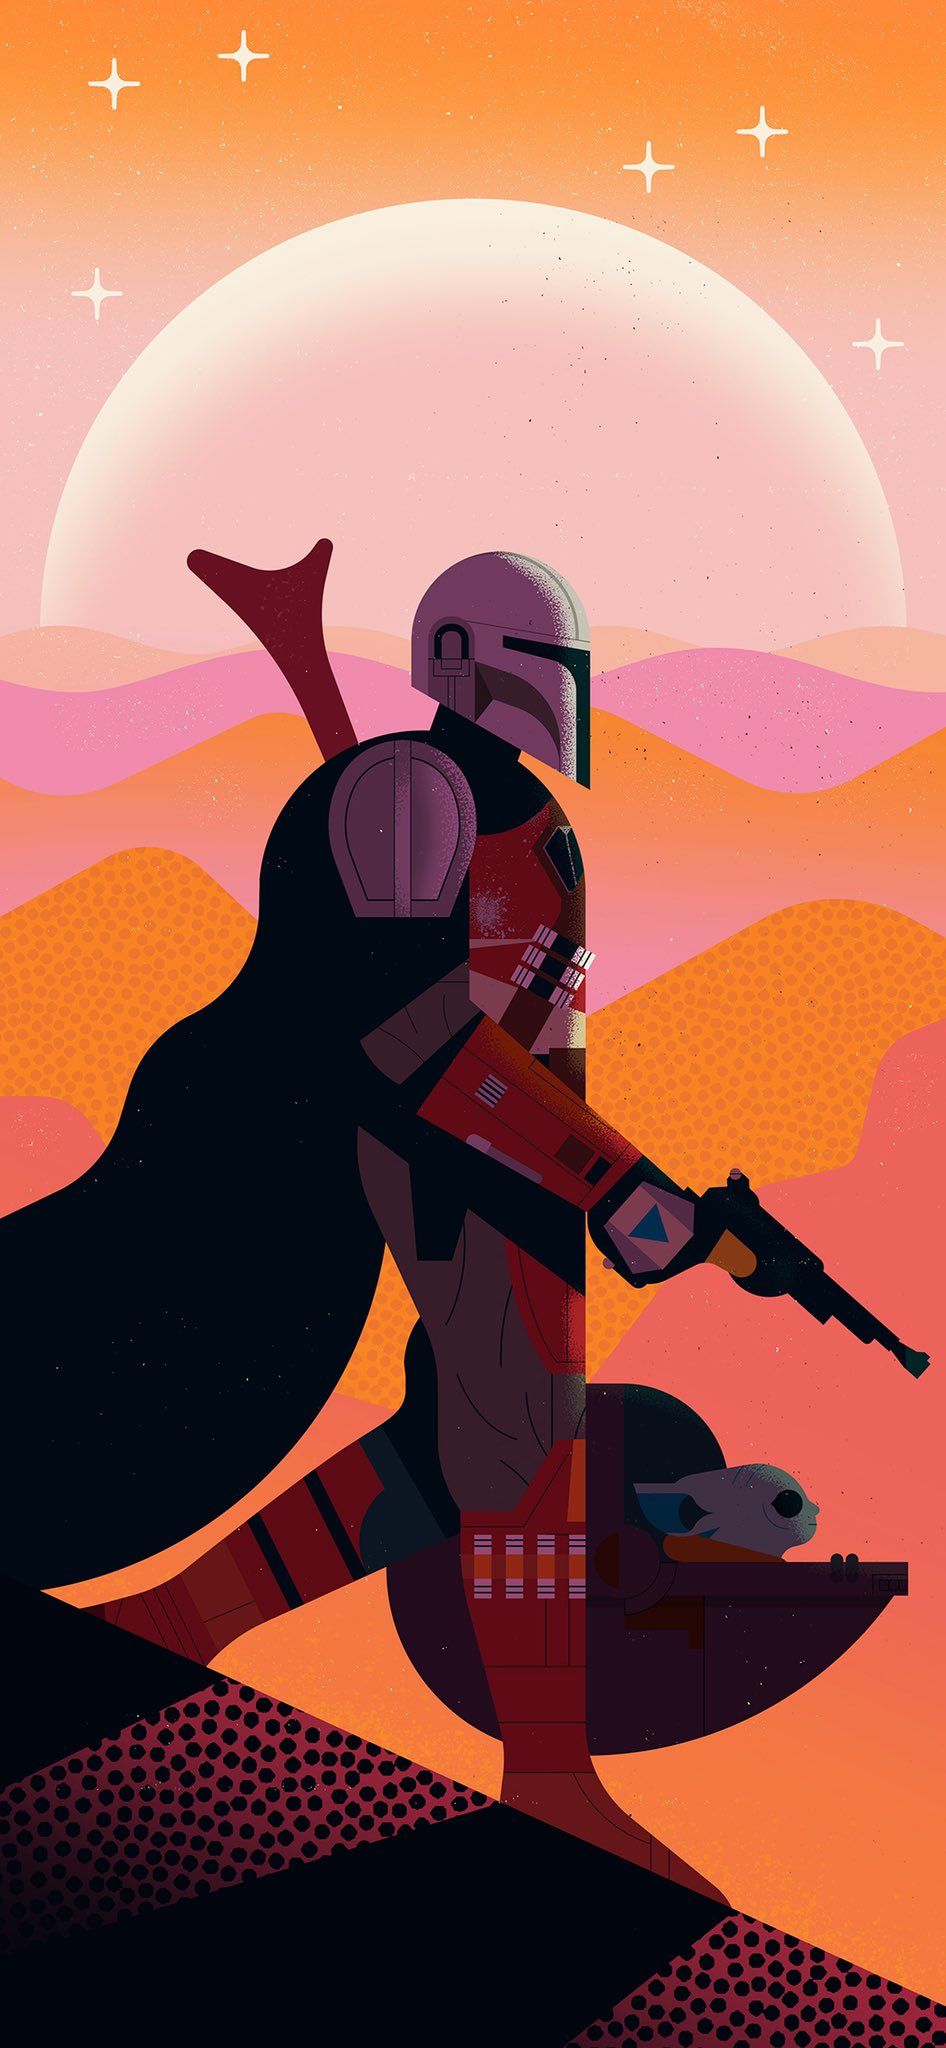  Mandalorian Hintergrundbild 946x2048. Owen Davey on X: It's Star Wars Day! Mandalorian free phone wallpaper for the 'Wish I Was There' campaign by m. save it to your phone and use it as